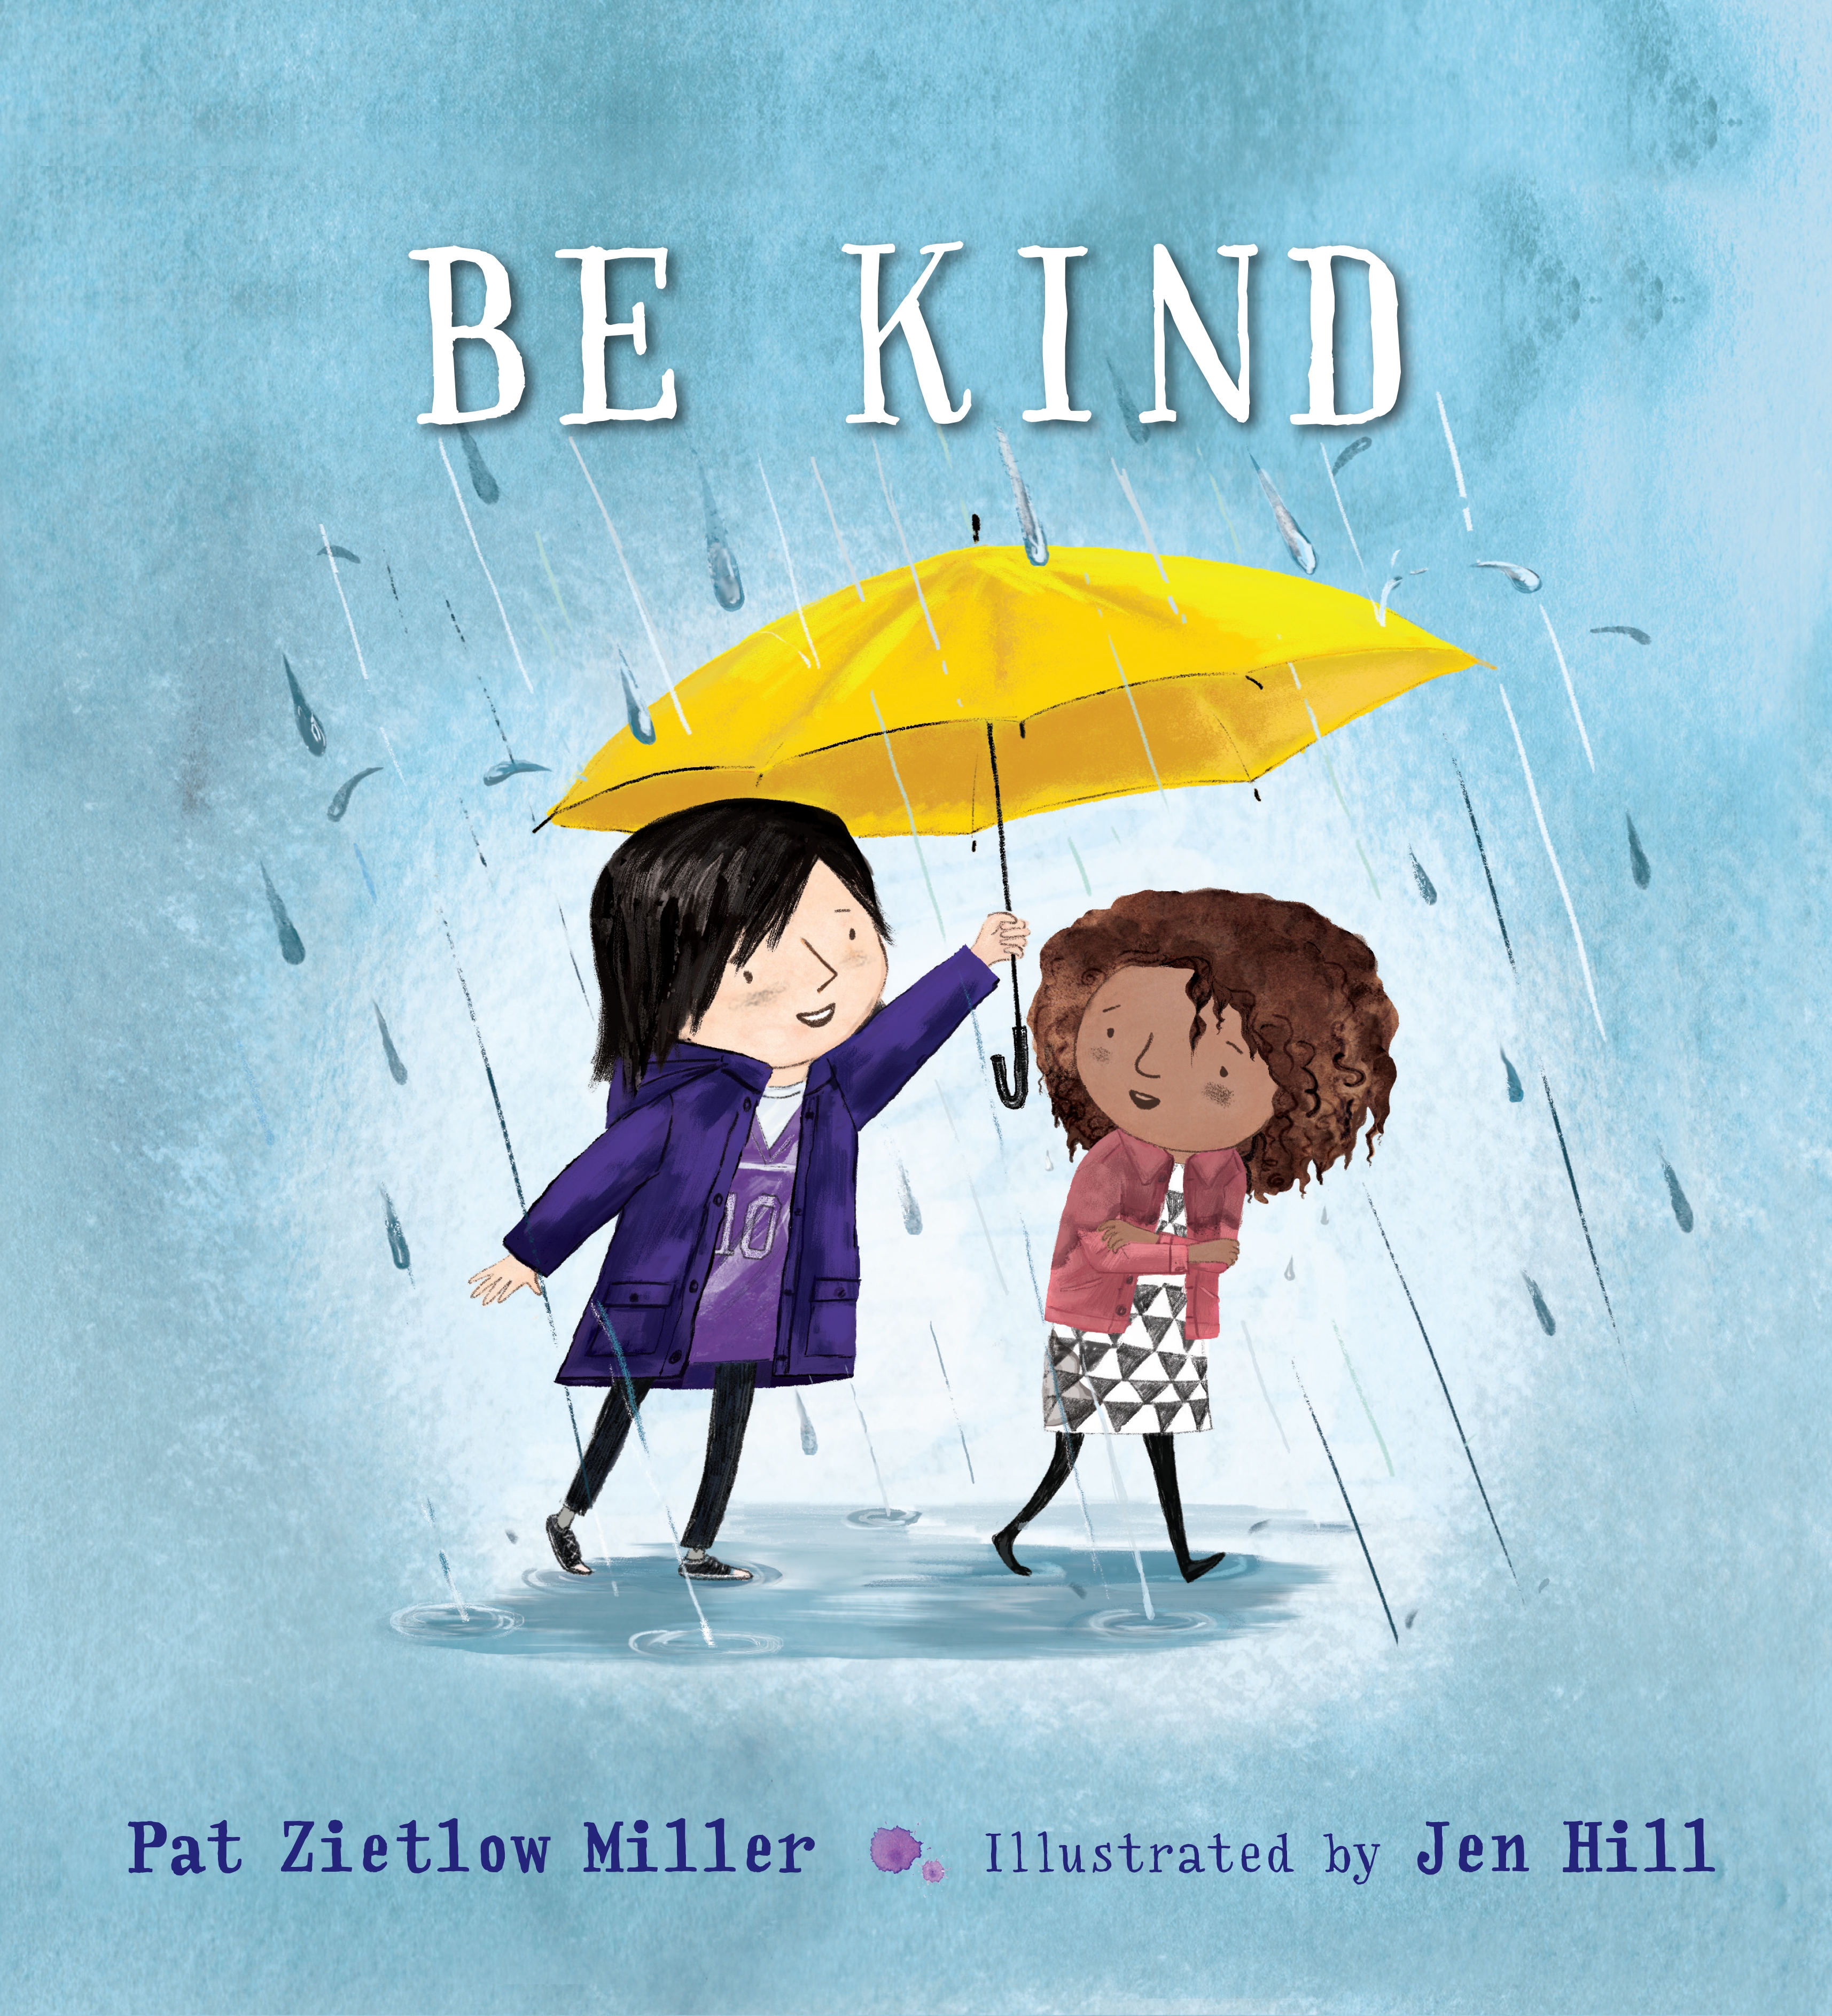 Sunday Story Time with Jen Hill (Illustrator of Be Kind)